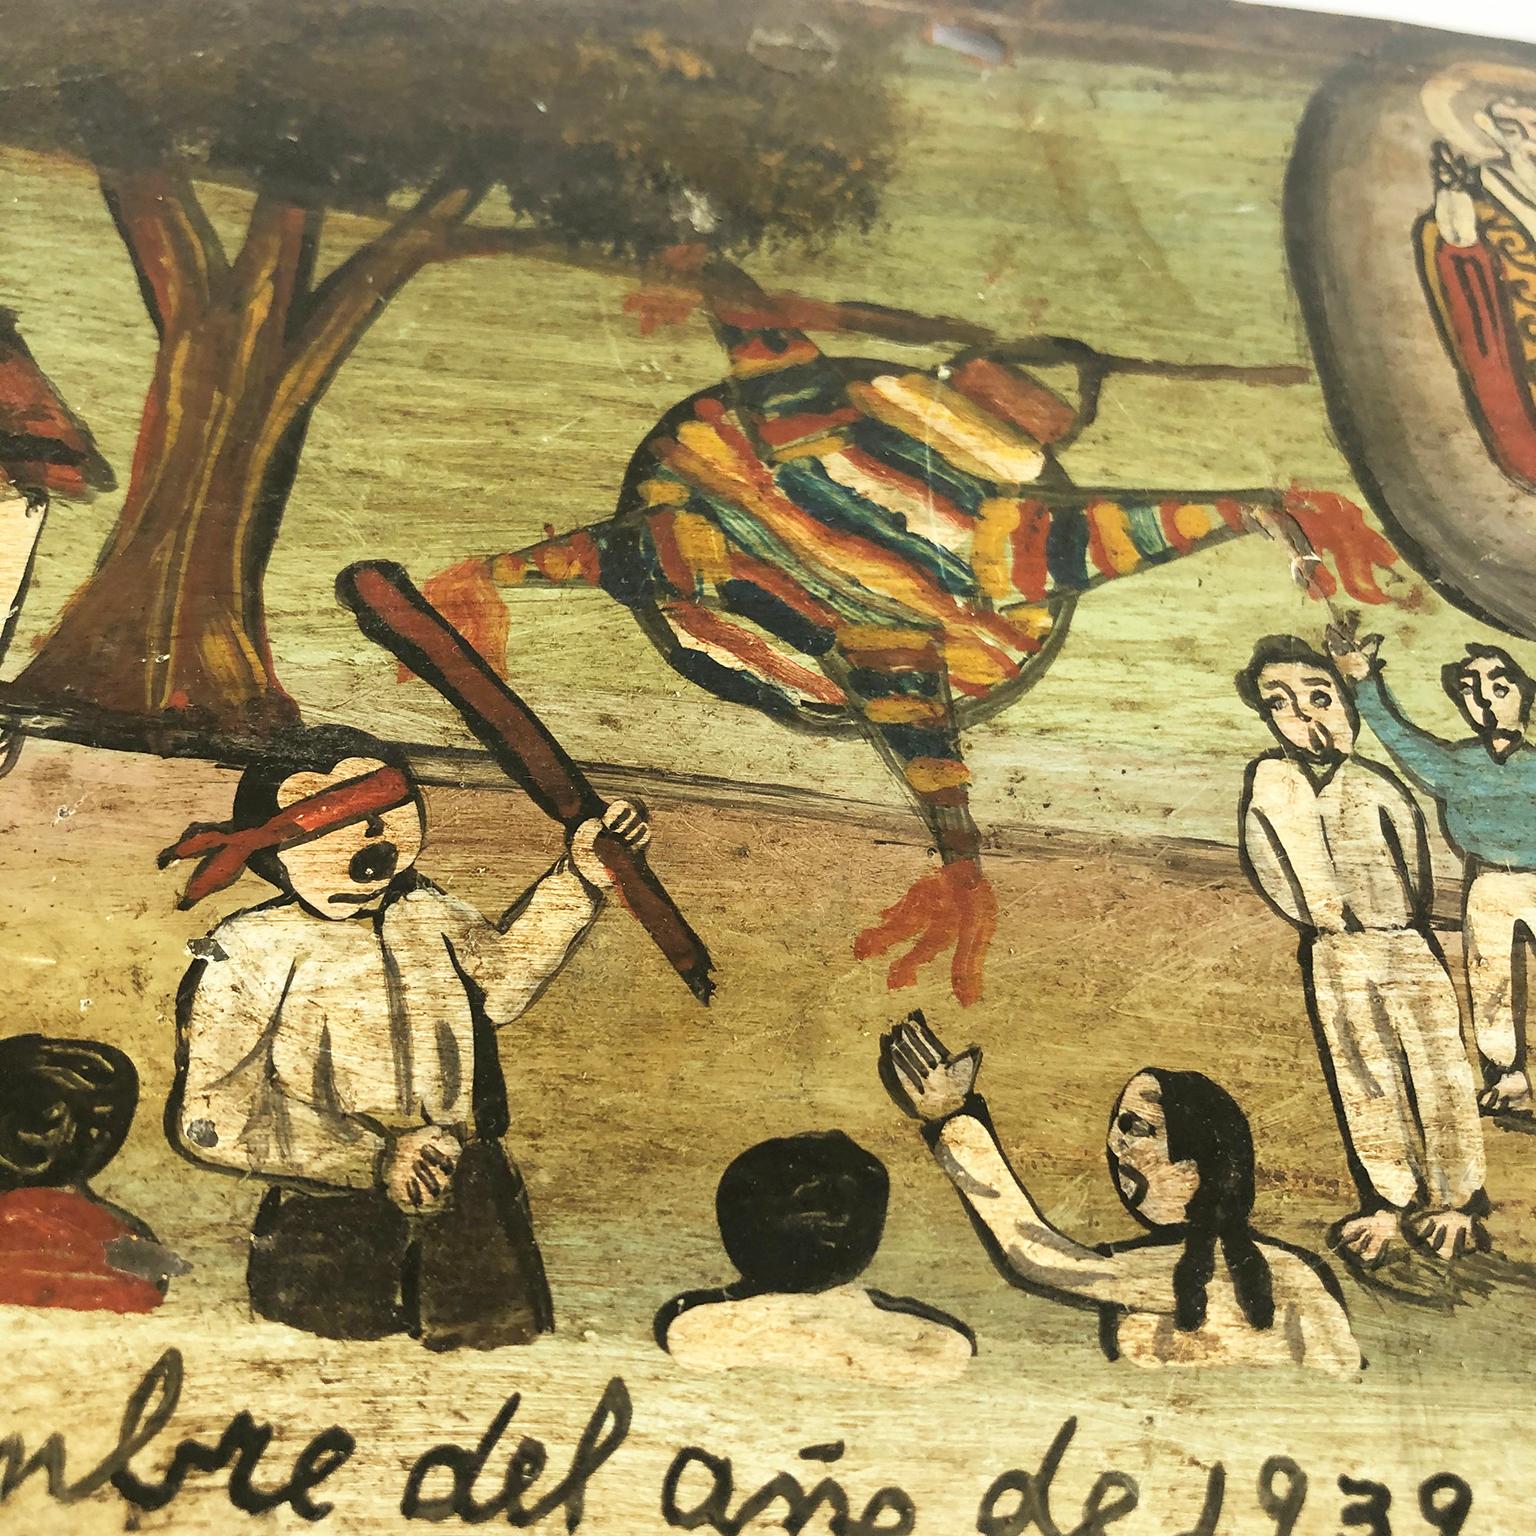 Dated 1939, we offer this original exvoto. On December 17, 1939 in the town of Cholula it happened to Cipriana Garcia when she broke a piñata they broke her head with a blow that left her very bad, her mother entrusted her to San Nicolasito and the